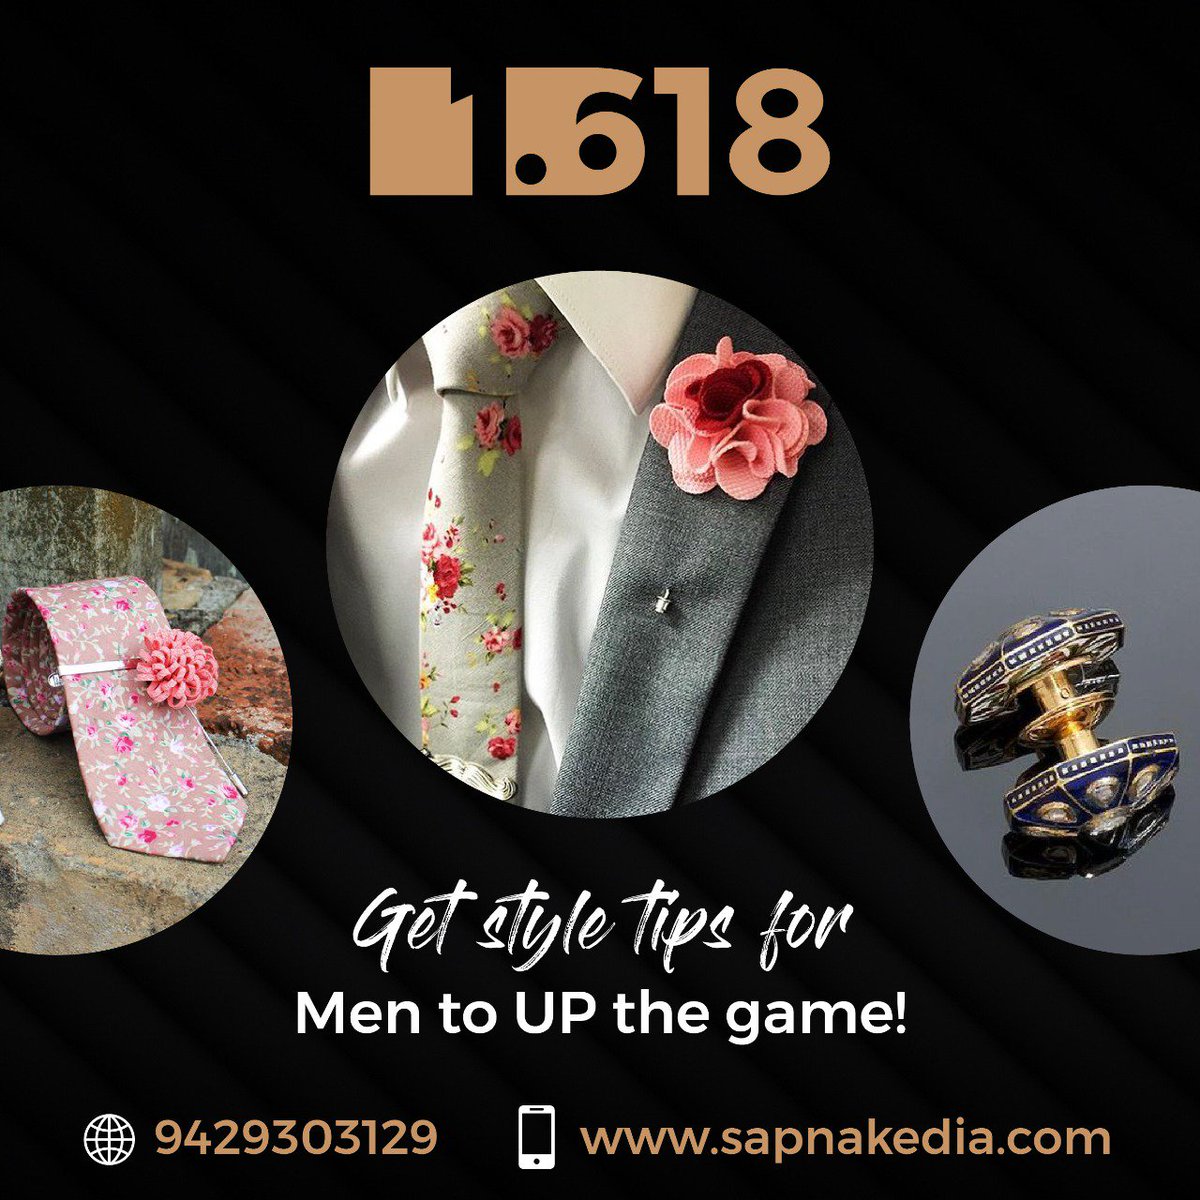 Get style tipes for Men to Up the game! 

sapnakedia.com

#sapnakedia #style #men #imageconsulting #styletipes #tipesformen  #corporatetrainer #grooming #dressup #personalitydevlopment  #powerdressing  #personality